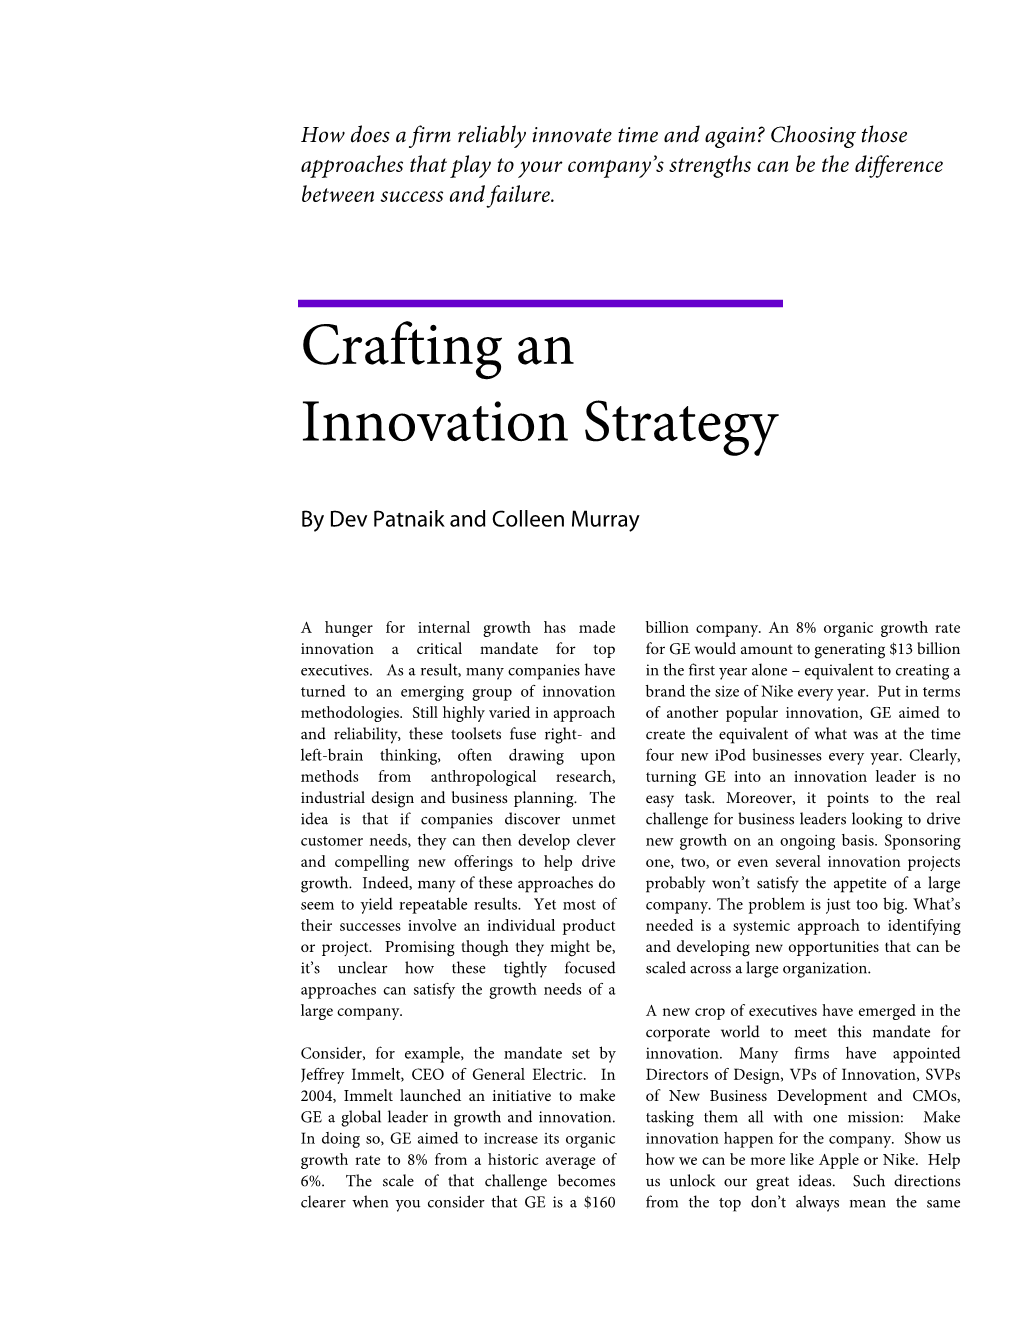 Crafting an Innovation Strategy